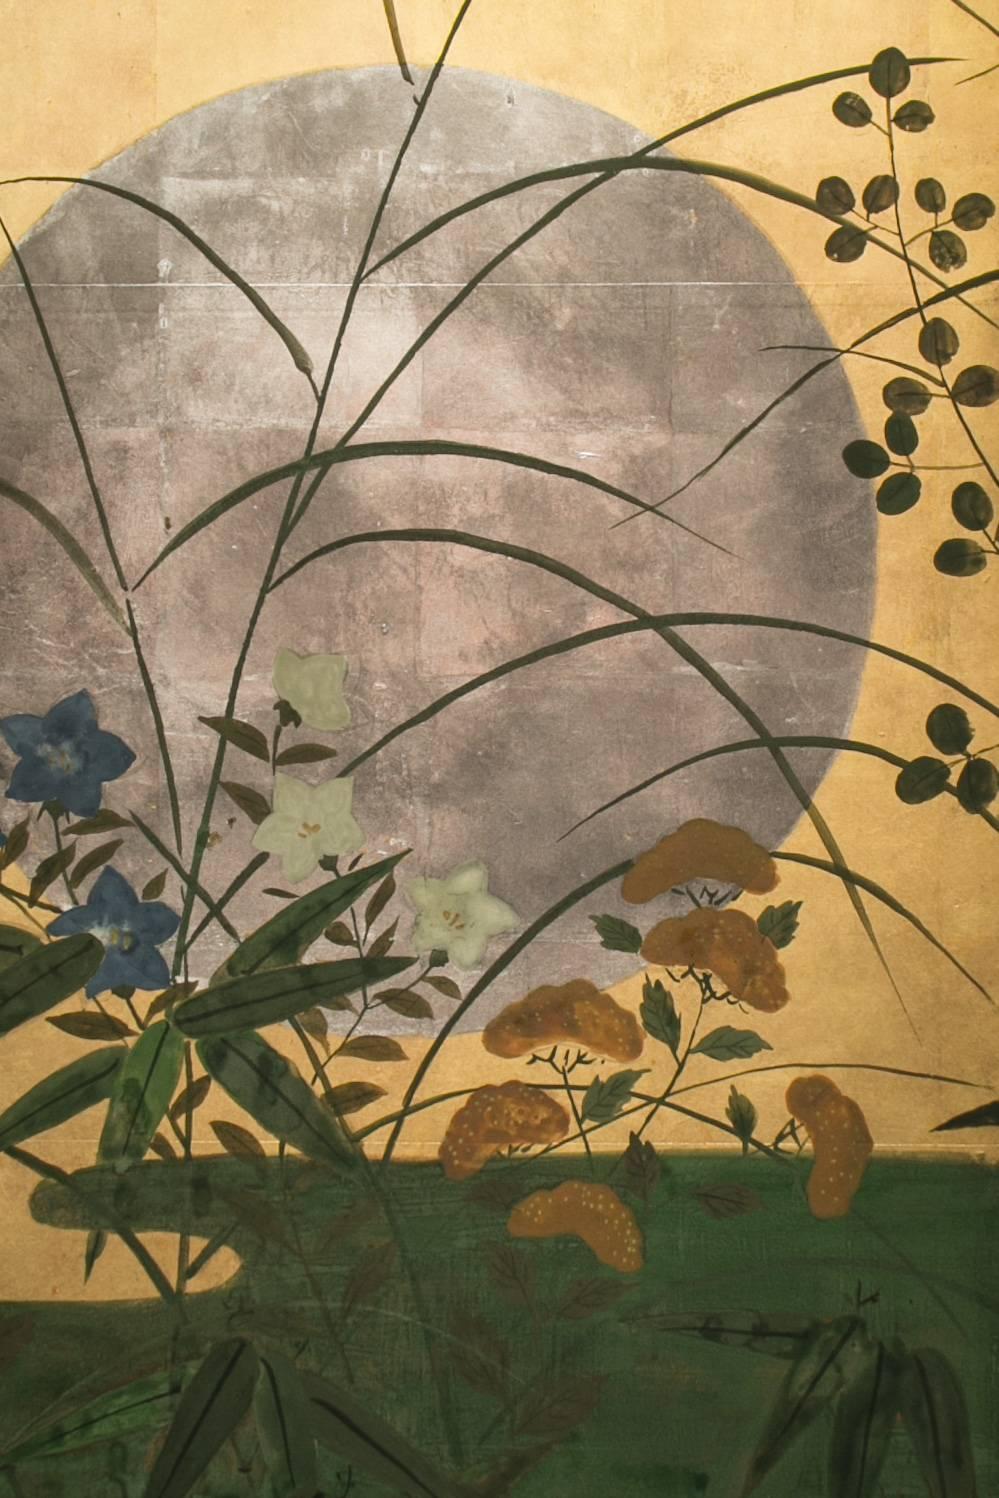 Japanese Six Panel Screen: Silver Moon Rising Over Summer Field.  Rimpa Style painting of a moon rising over summer flowers and grasses, including cockscomb and blue bellflowers.  Painted in mineral pigments on mulberry paper with a gold leaf ground